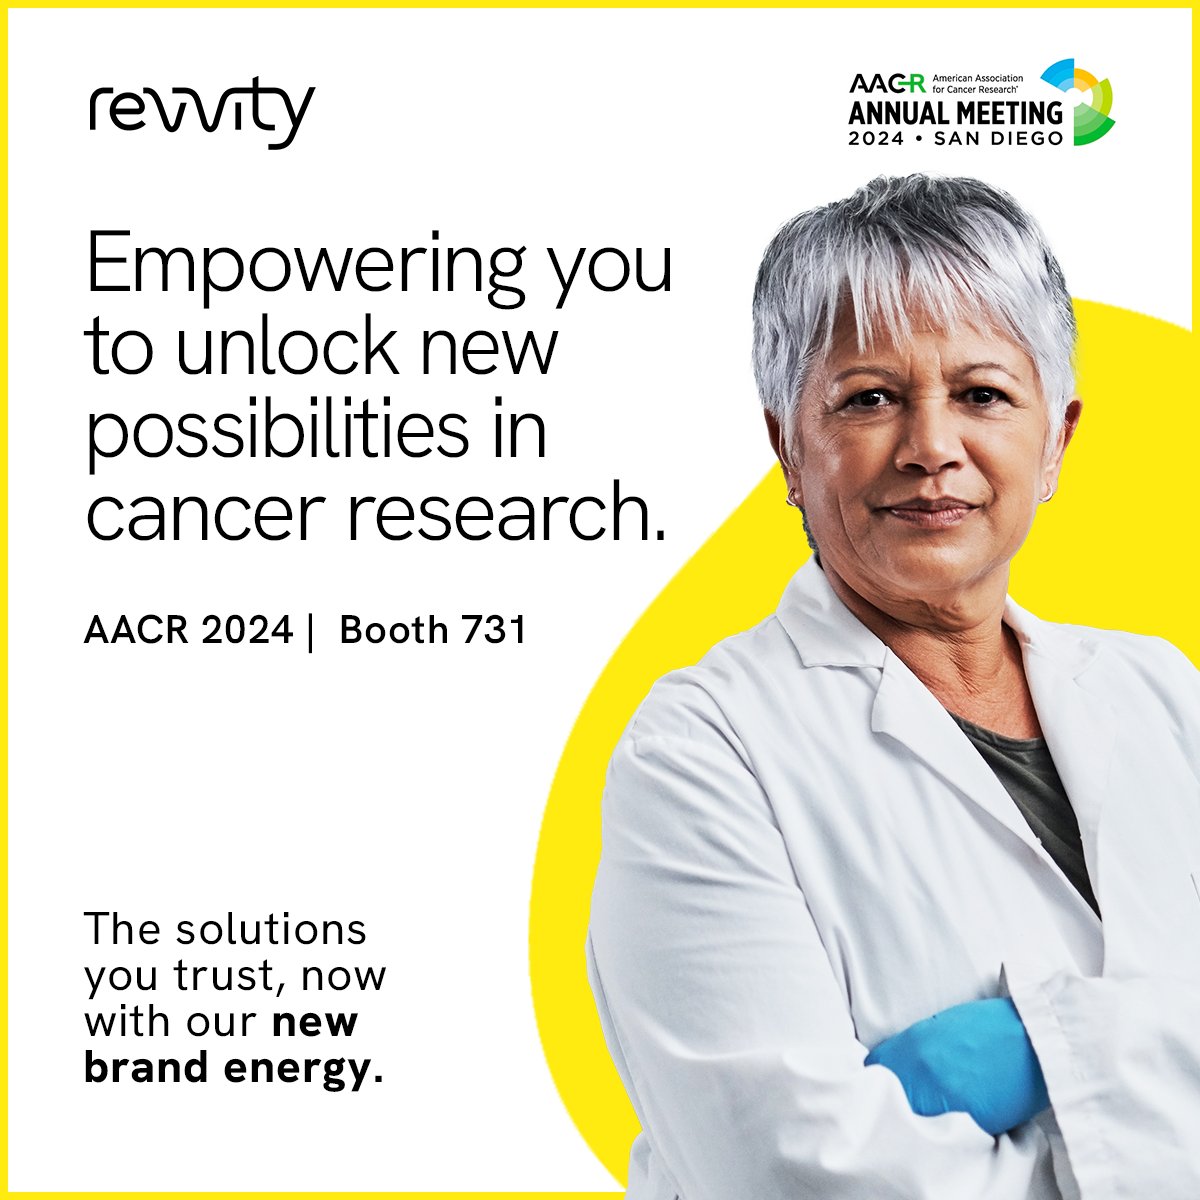 Fresh innovations that can help advance your cancer research. We have great things to show you at #AACR24. ms.spr.ly/6017c9fBN #Revvity #RevvupResearch